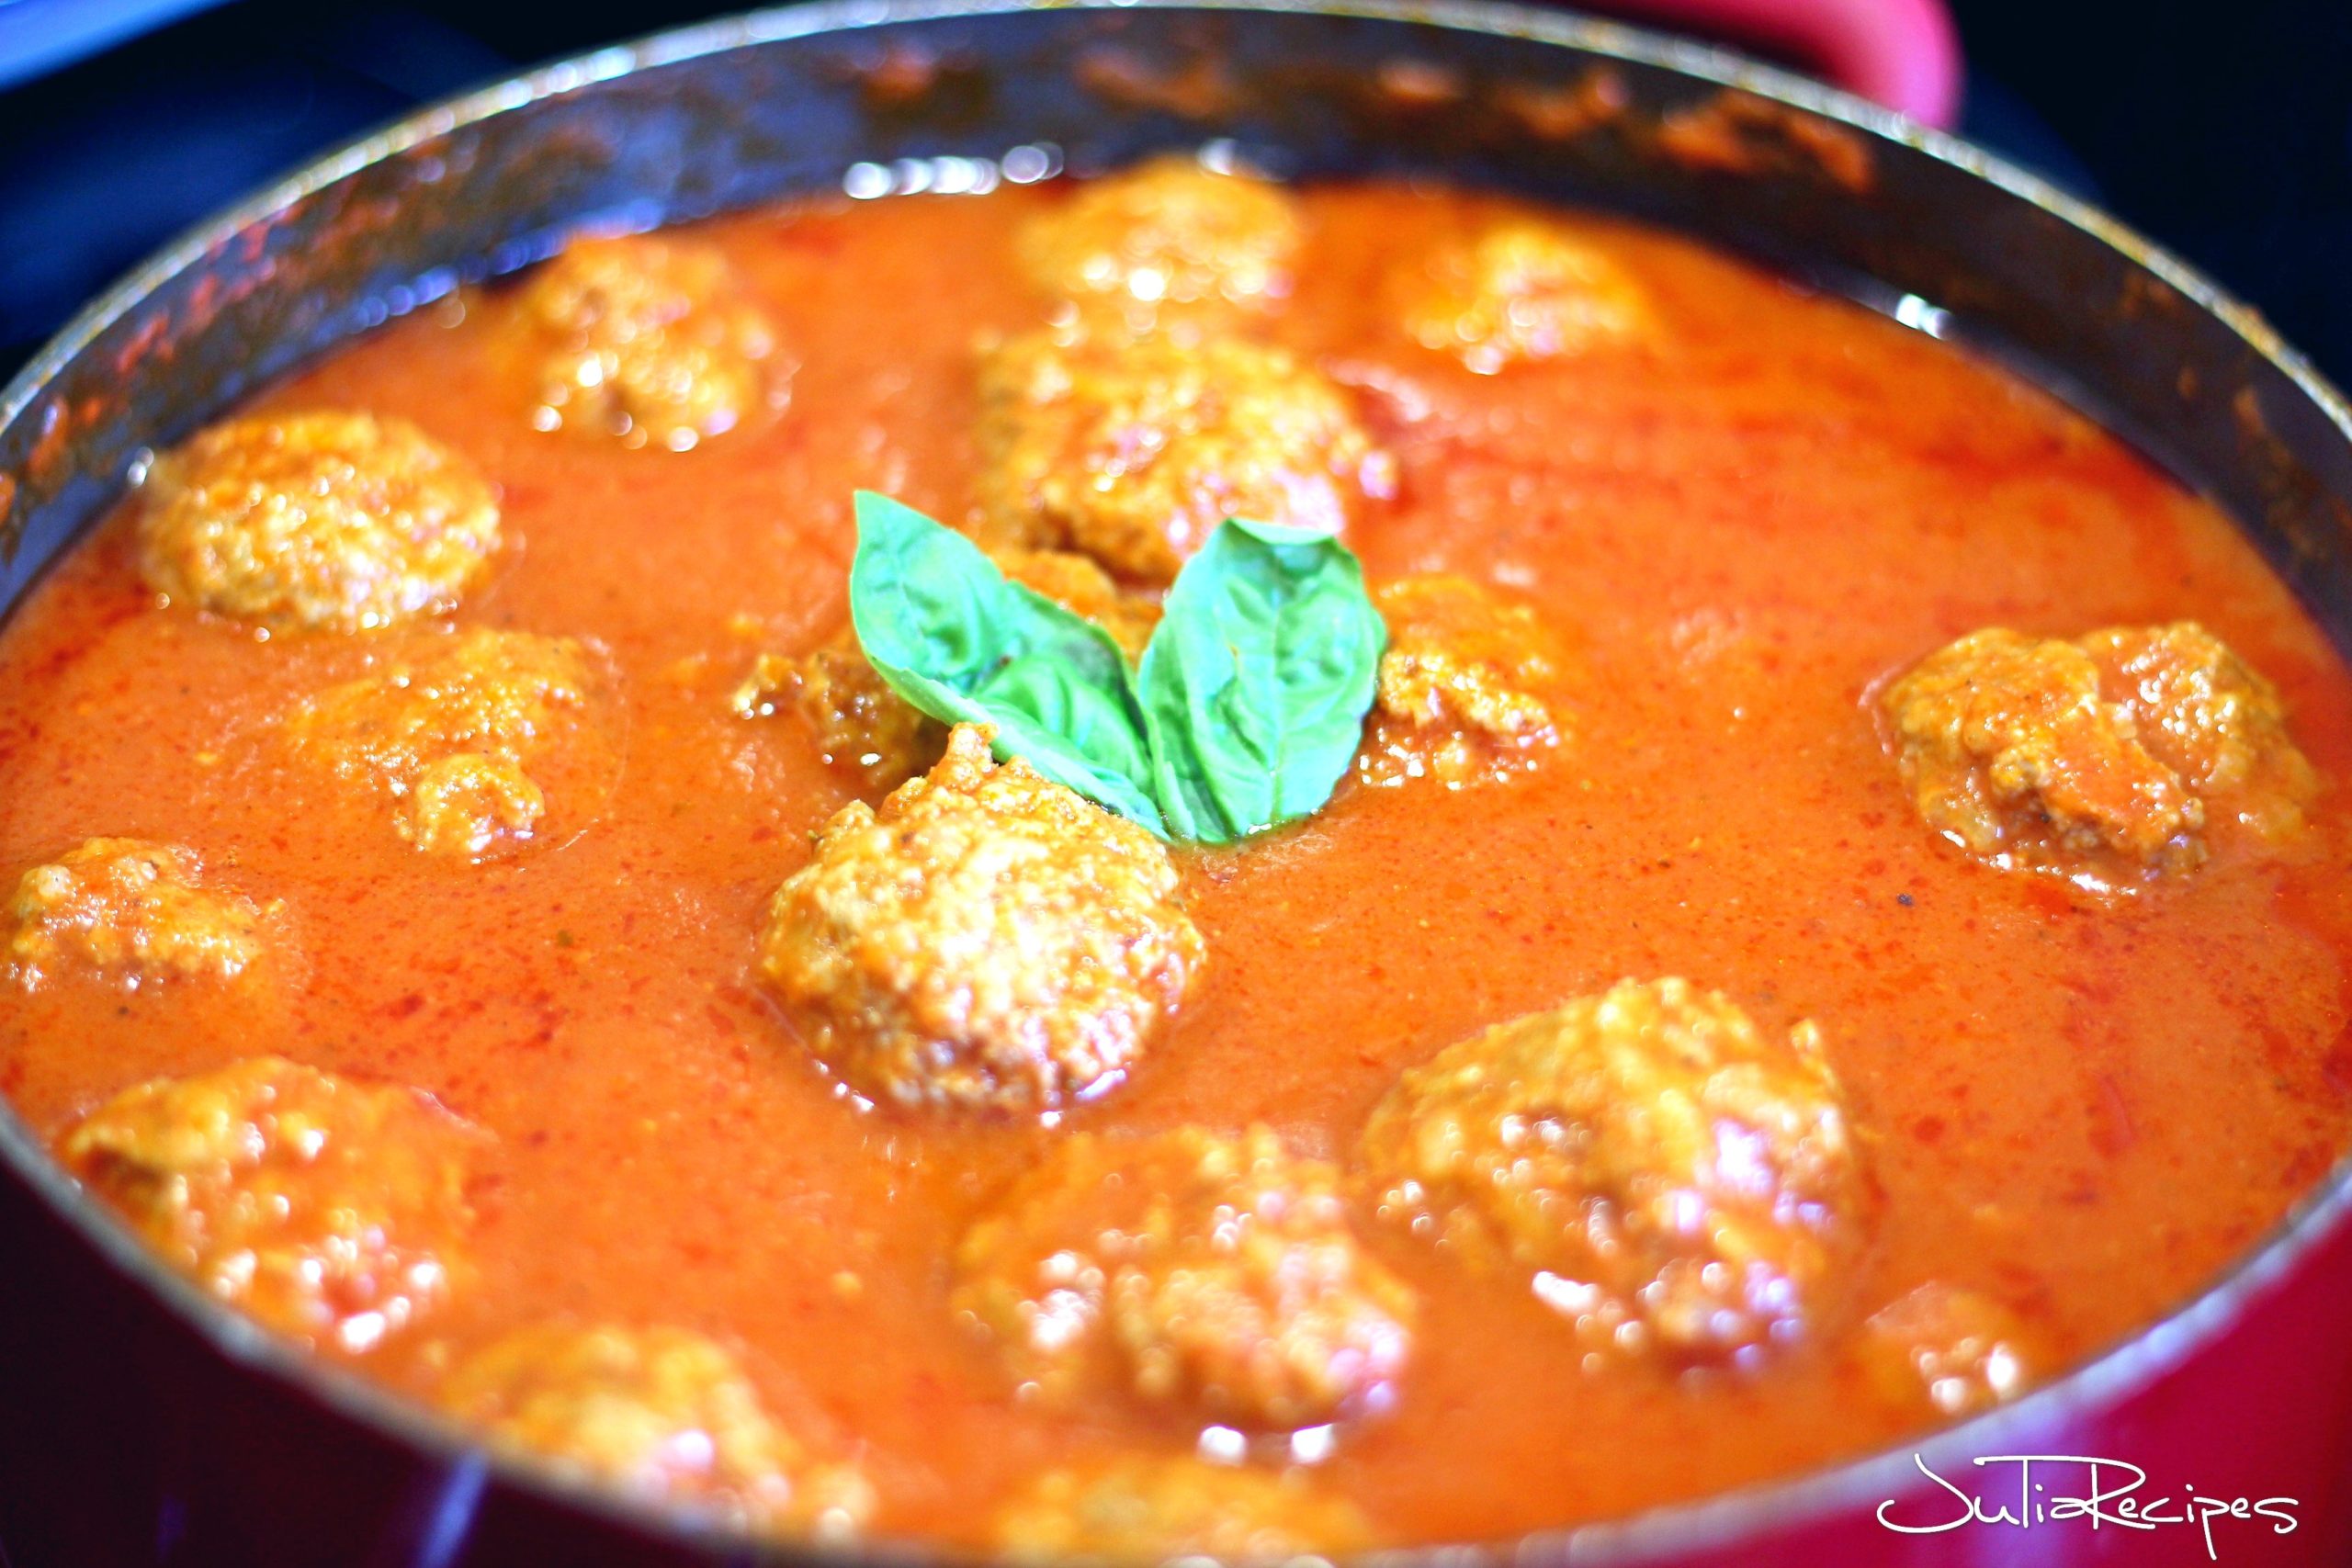 large sauce pot with meatballs in tomato sauce